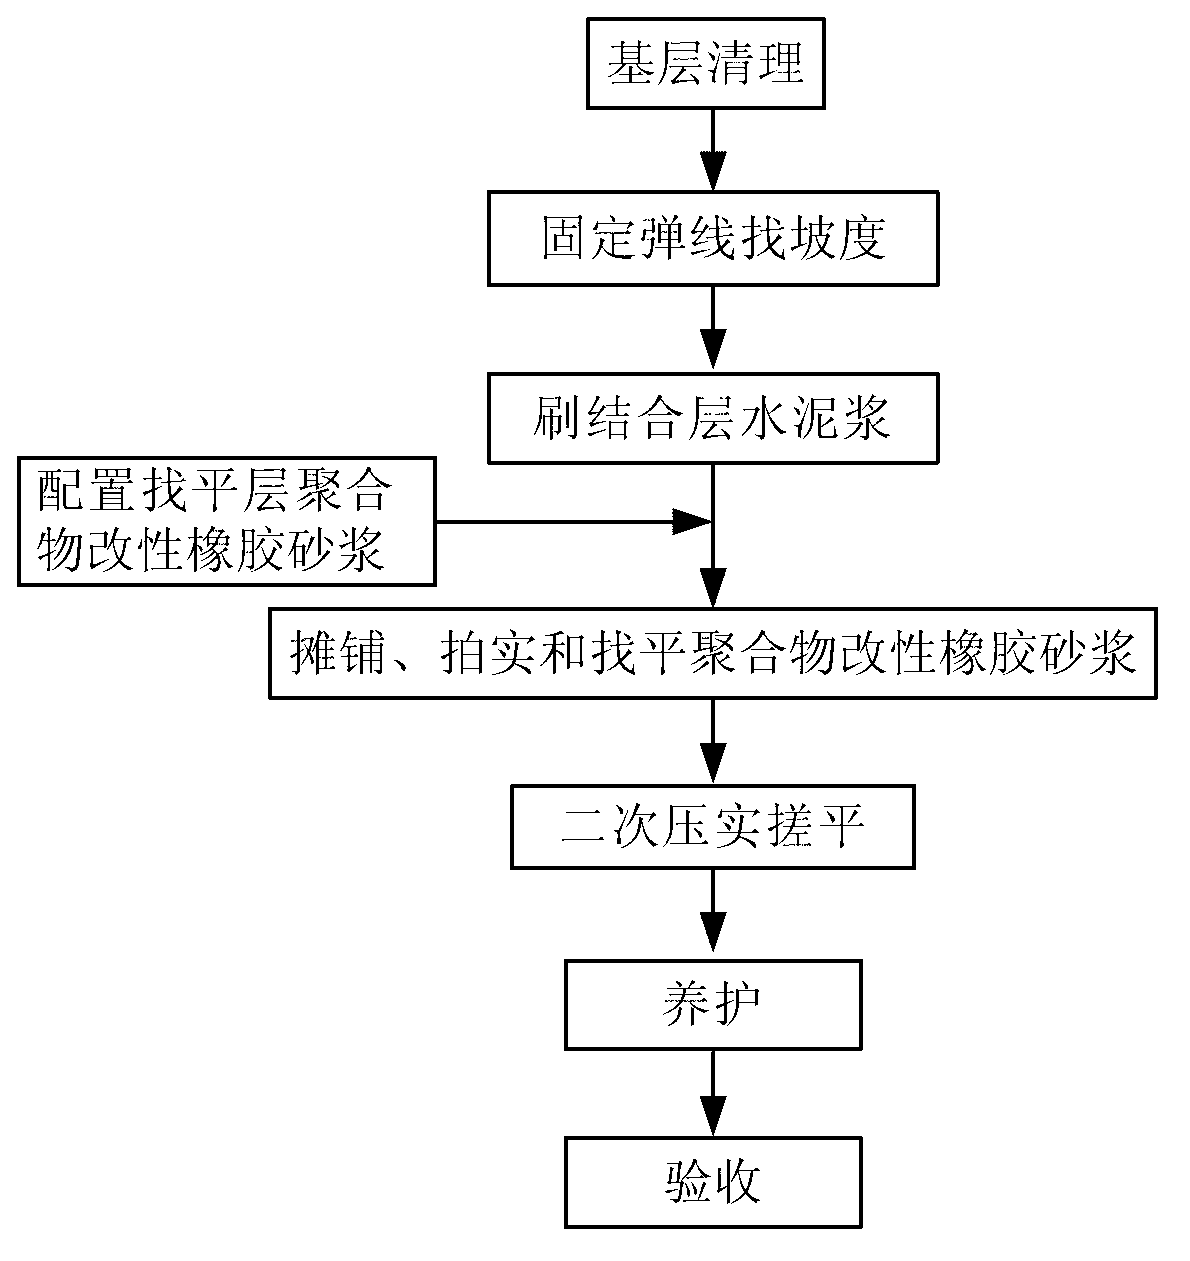 Polymer modified rubber mortar used for building leveling layer and construction method of polymer modified rubber mortar